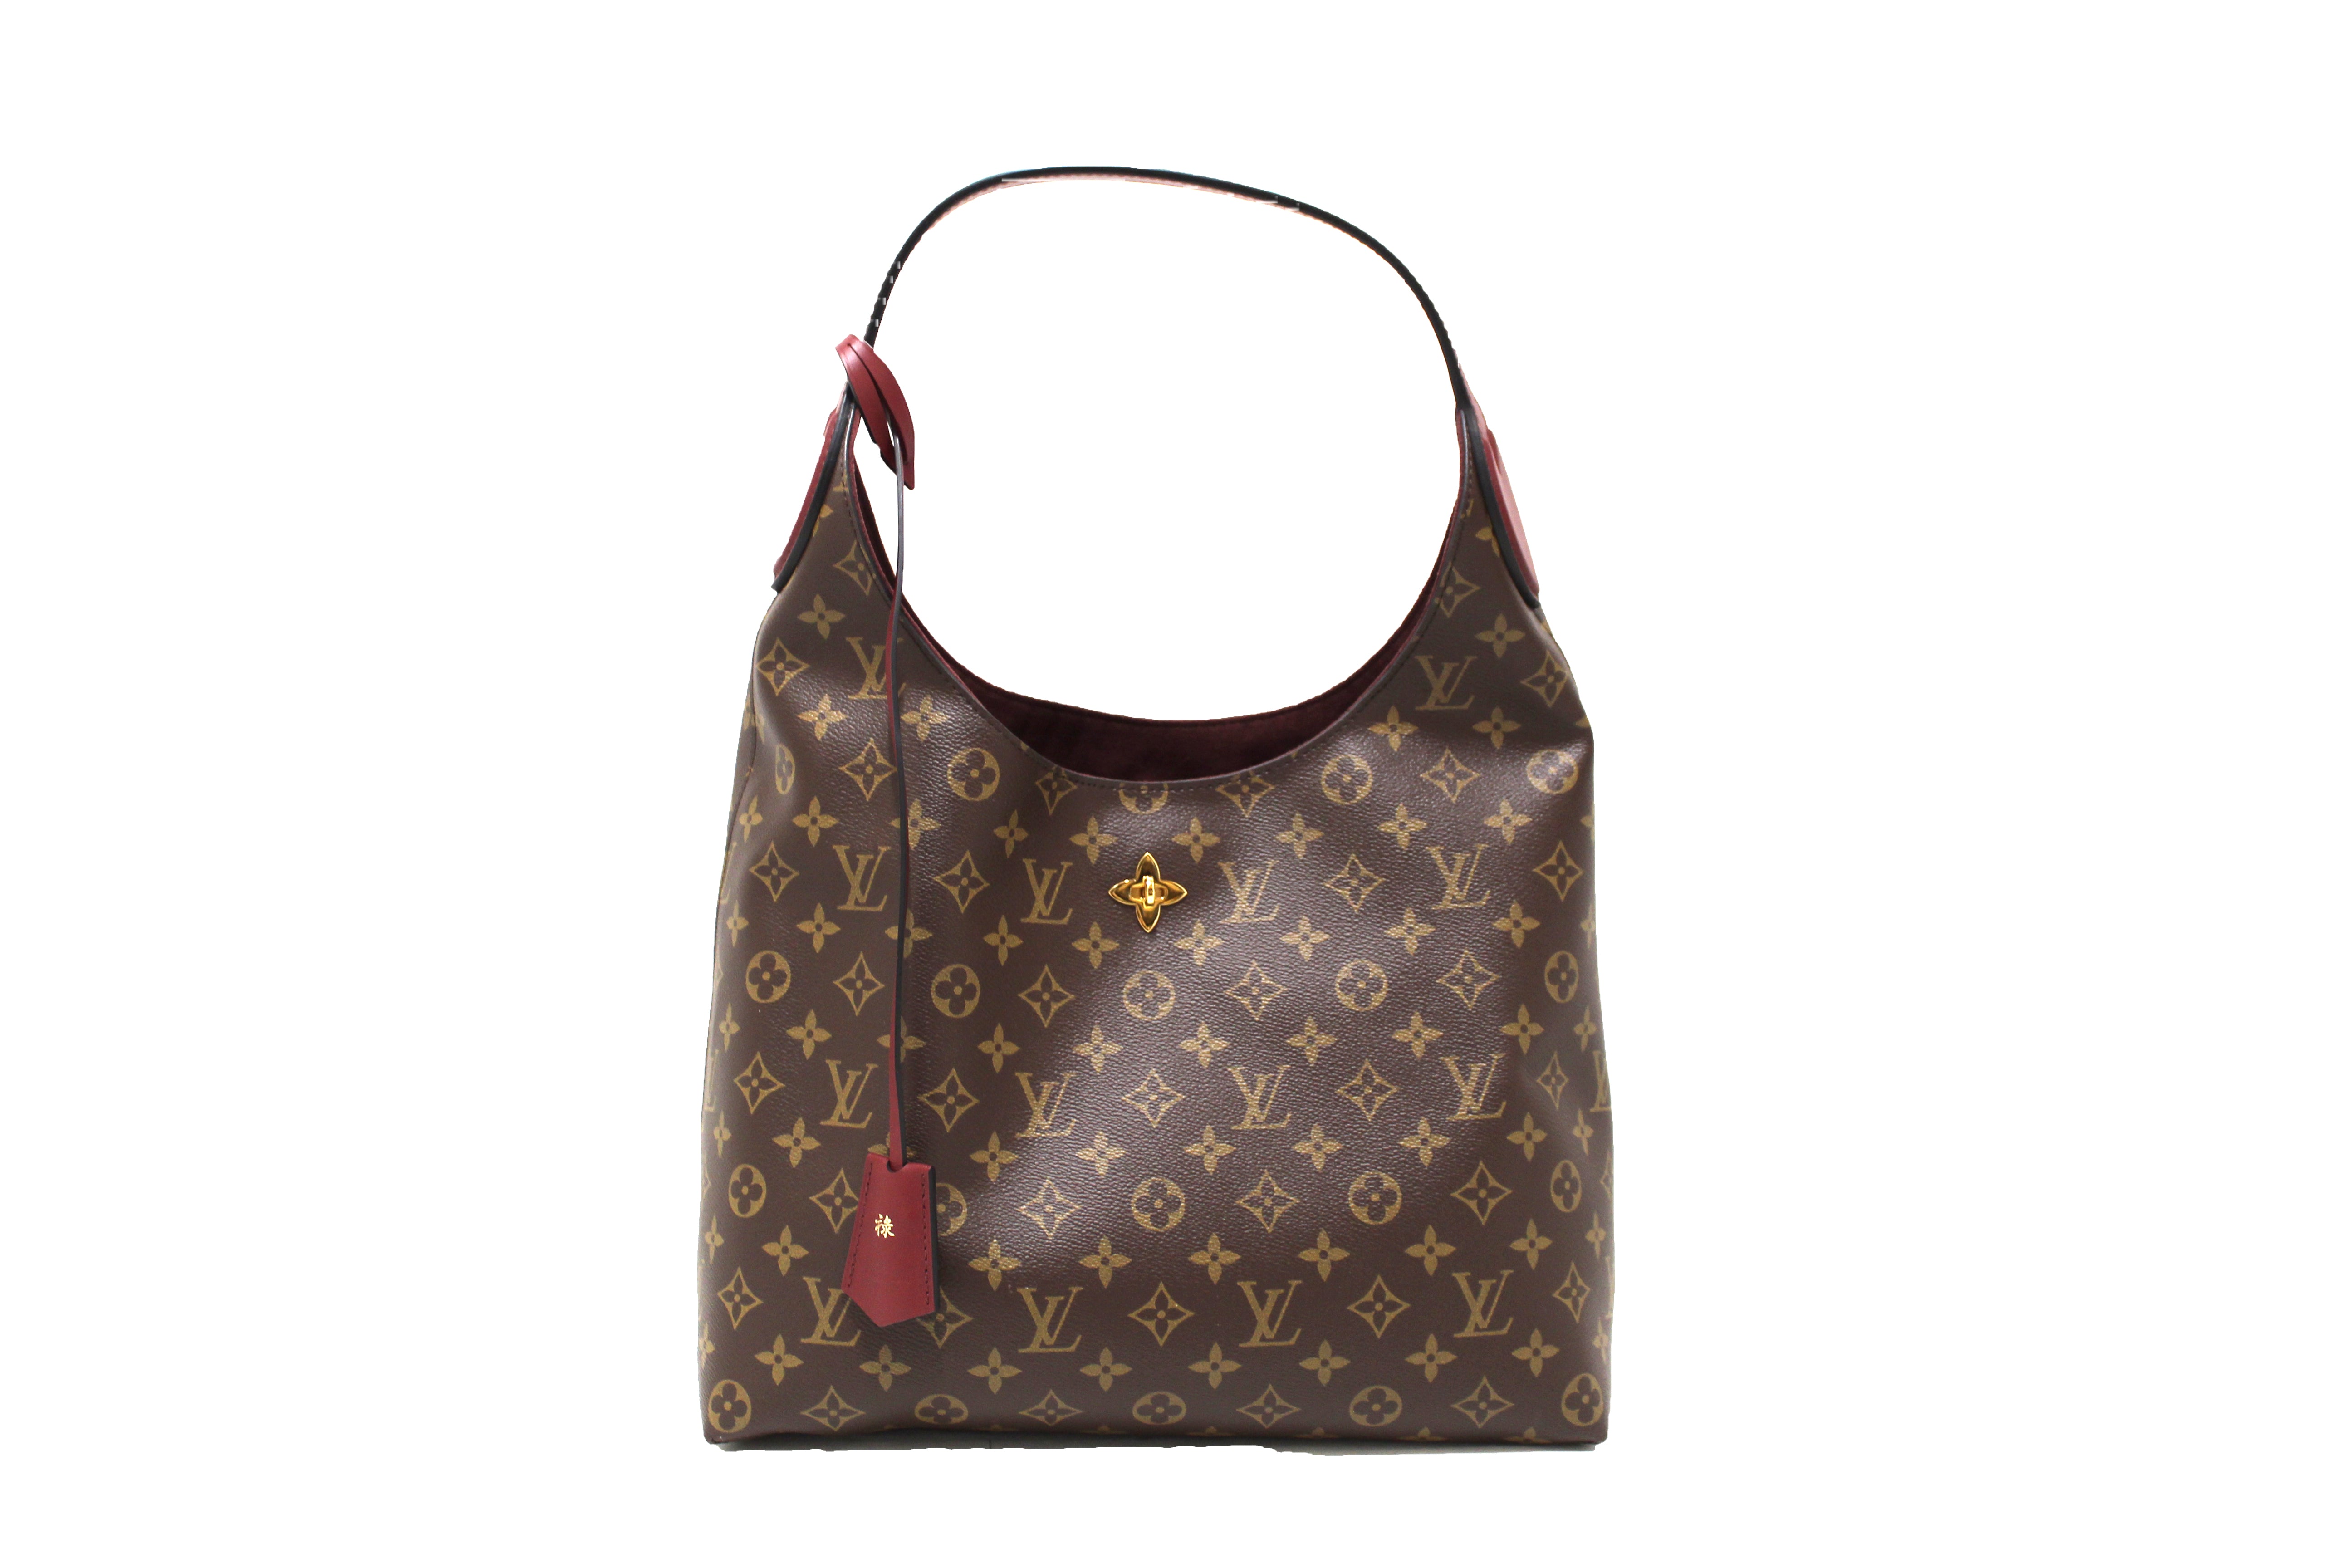 Authentic Louis Vuitton Classic Monogram with Burgundy Leather Flower Hobo Bag